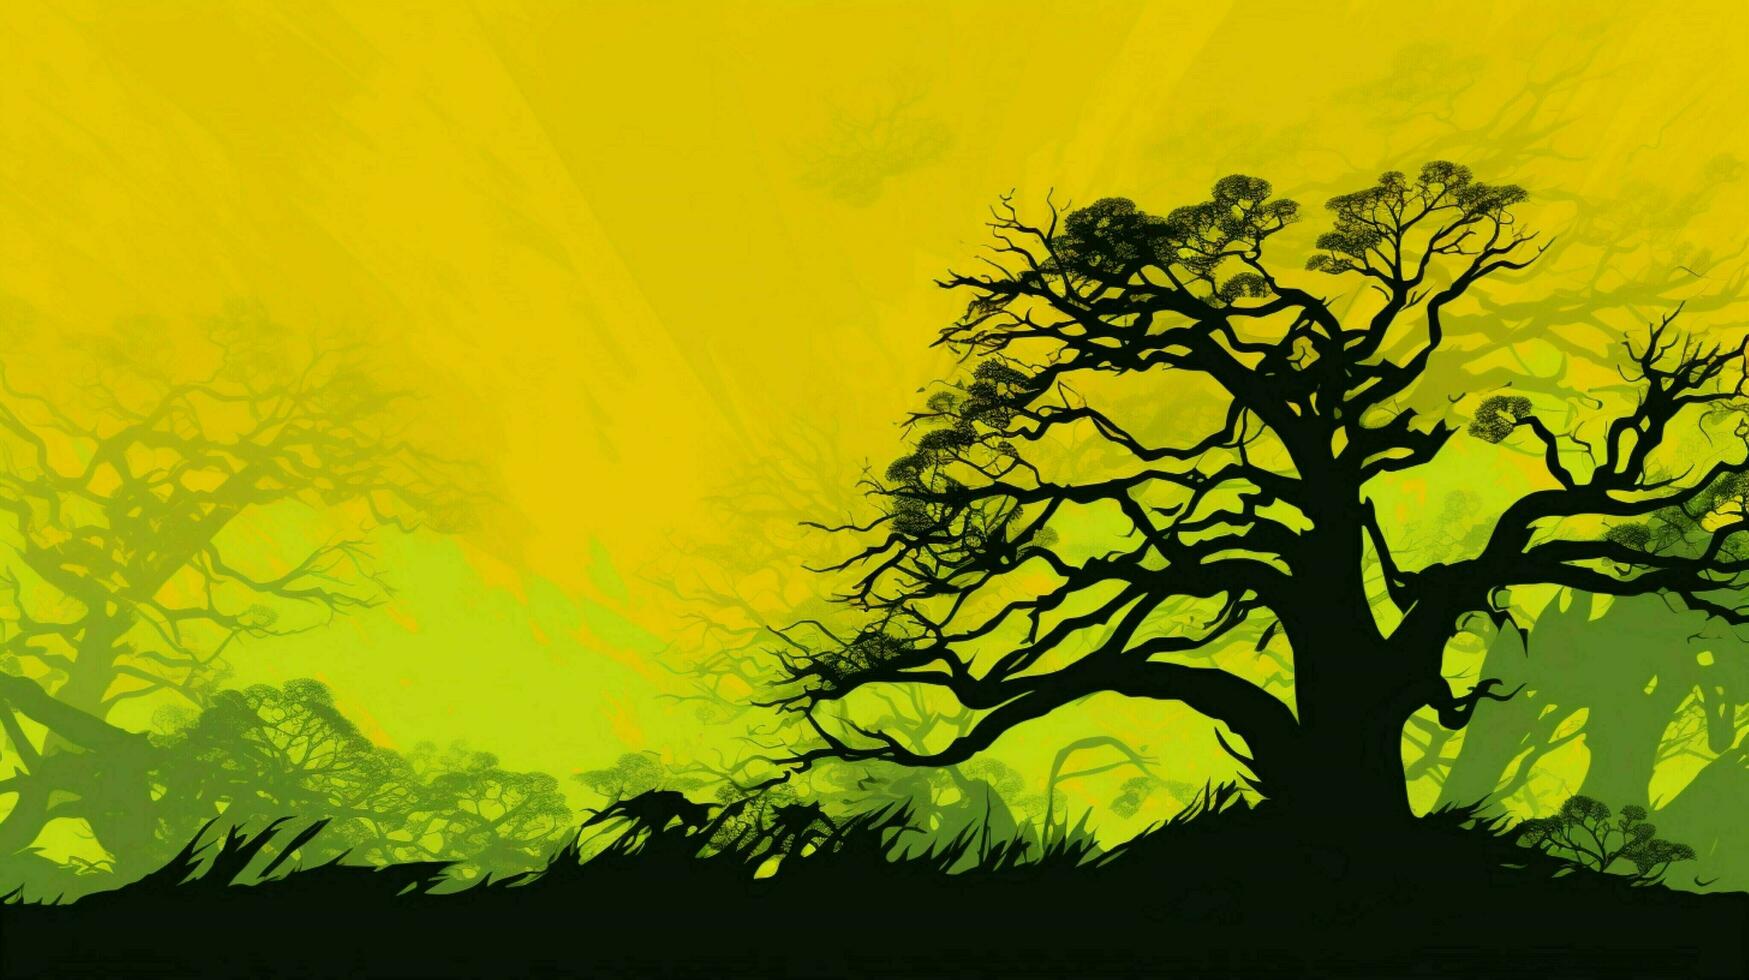 abstract nature green tree silhouette on yellow backdrop photo